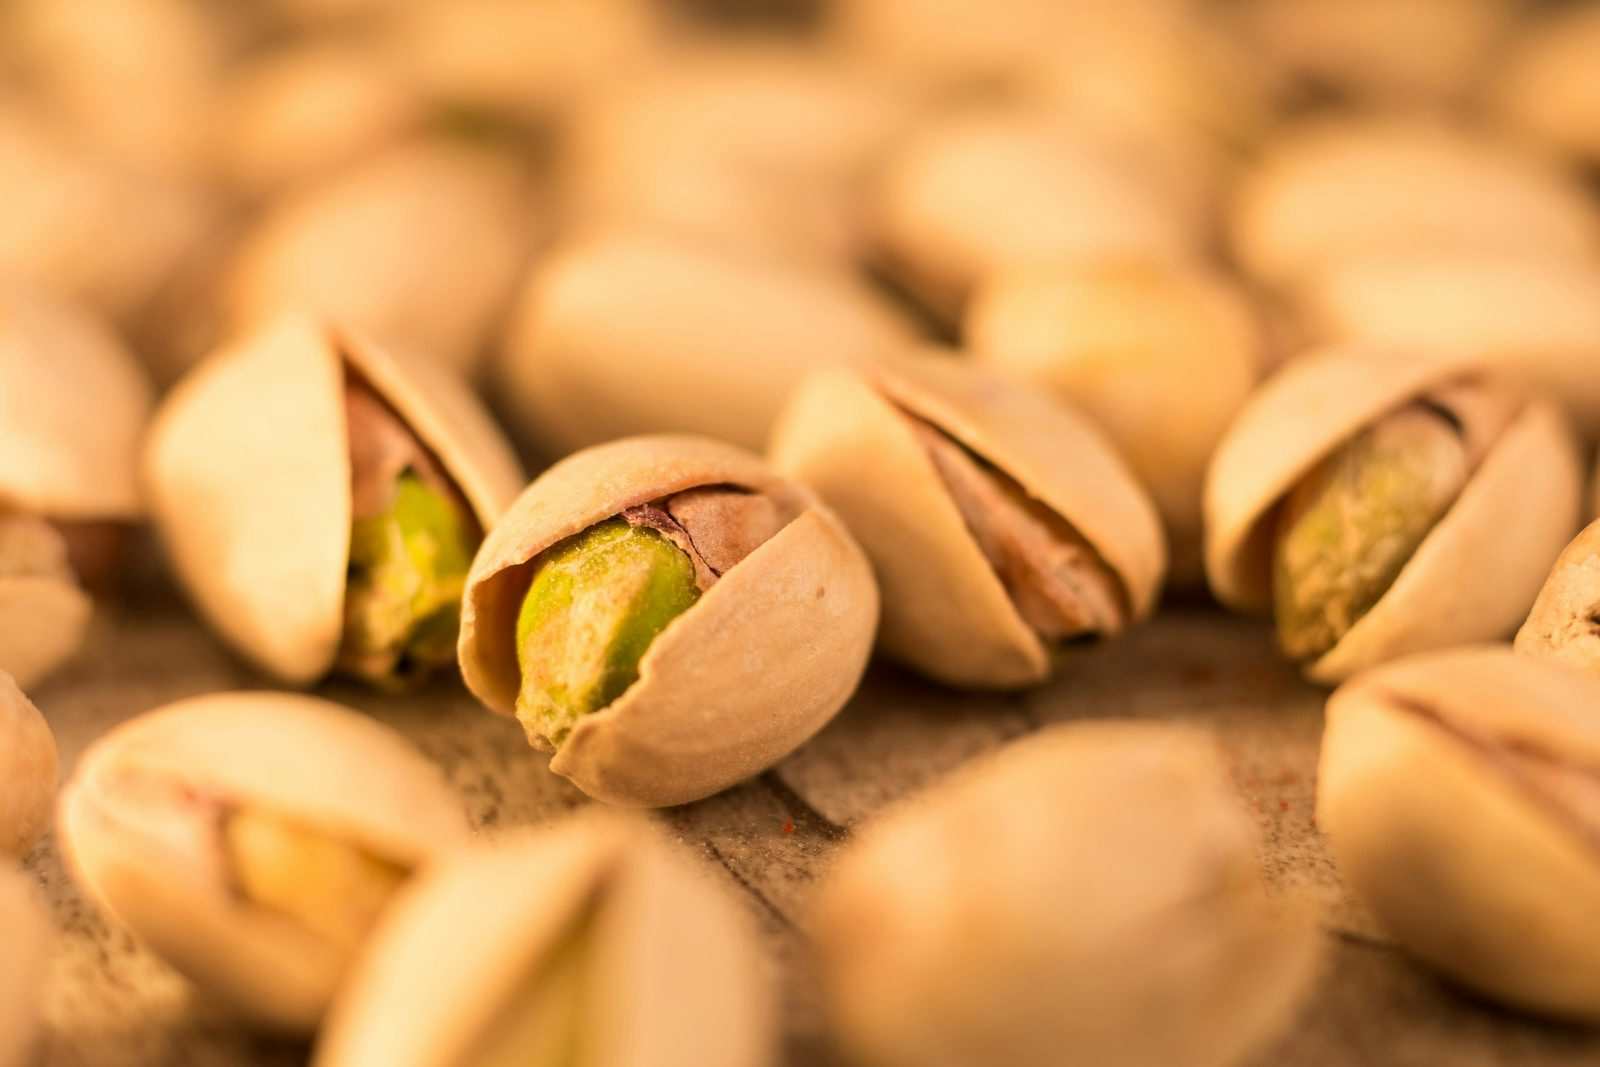 Machinery and Equipment For Processing Pistachio Nuts